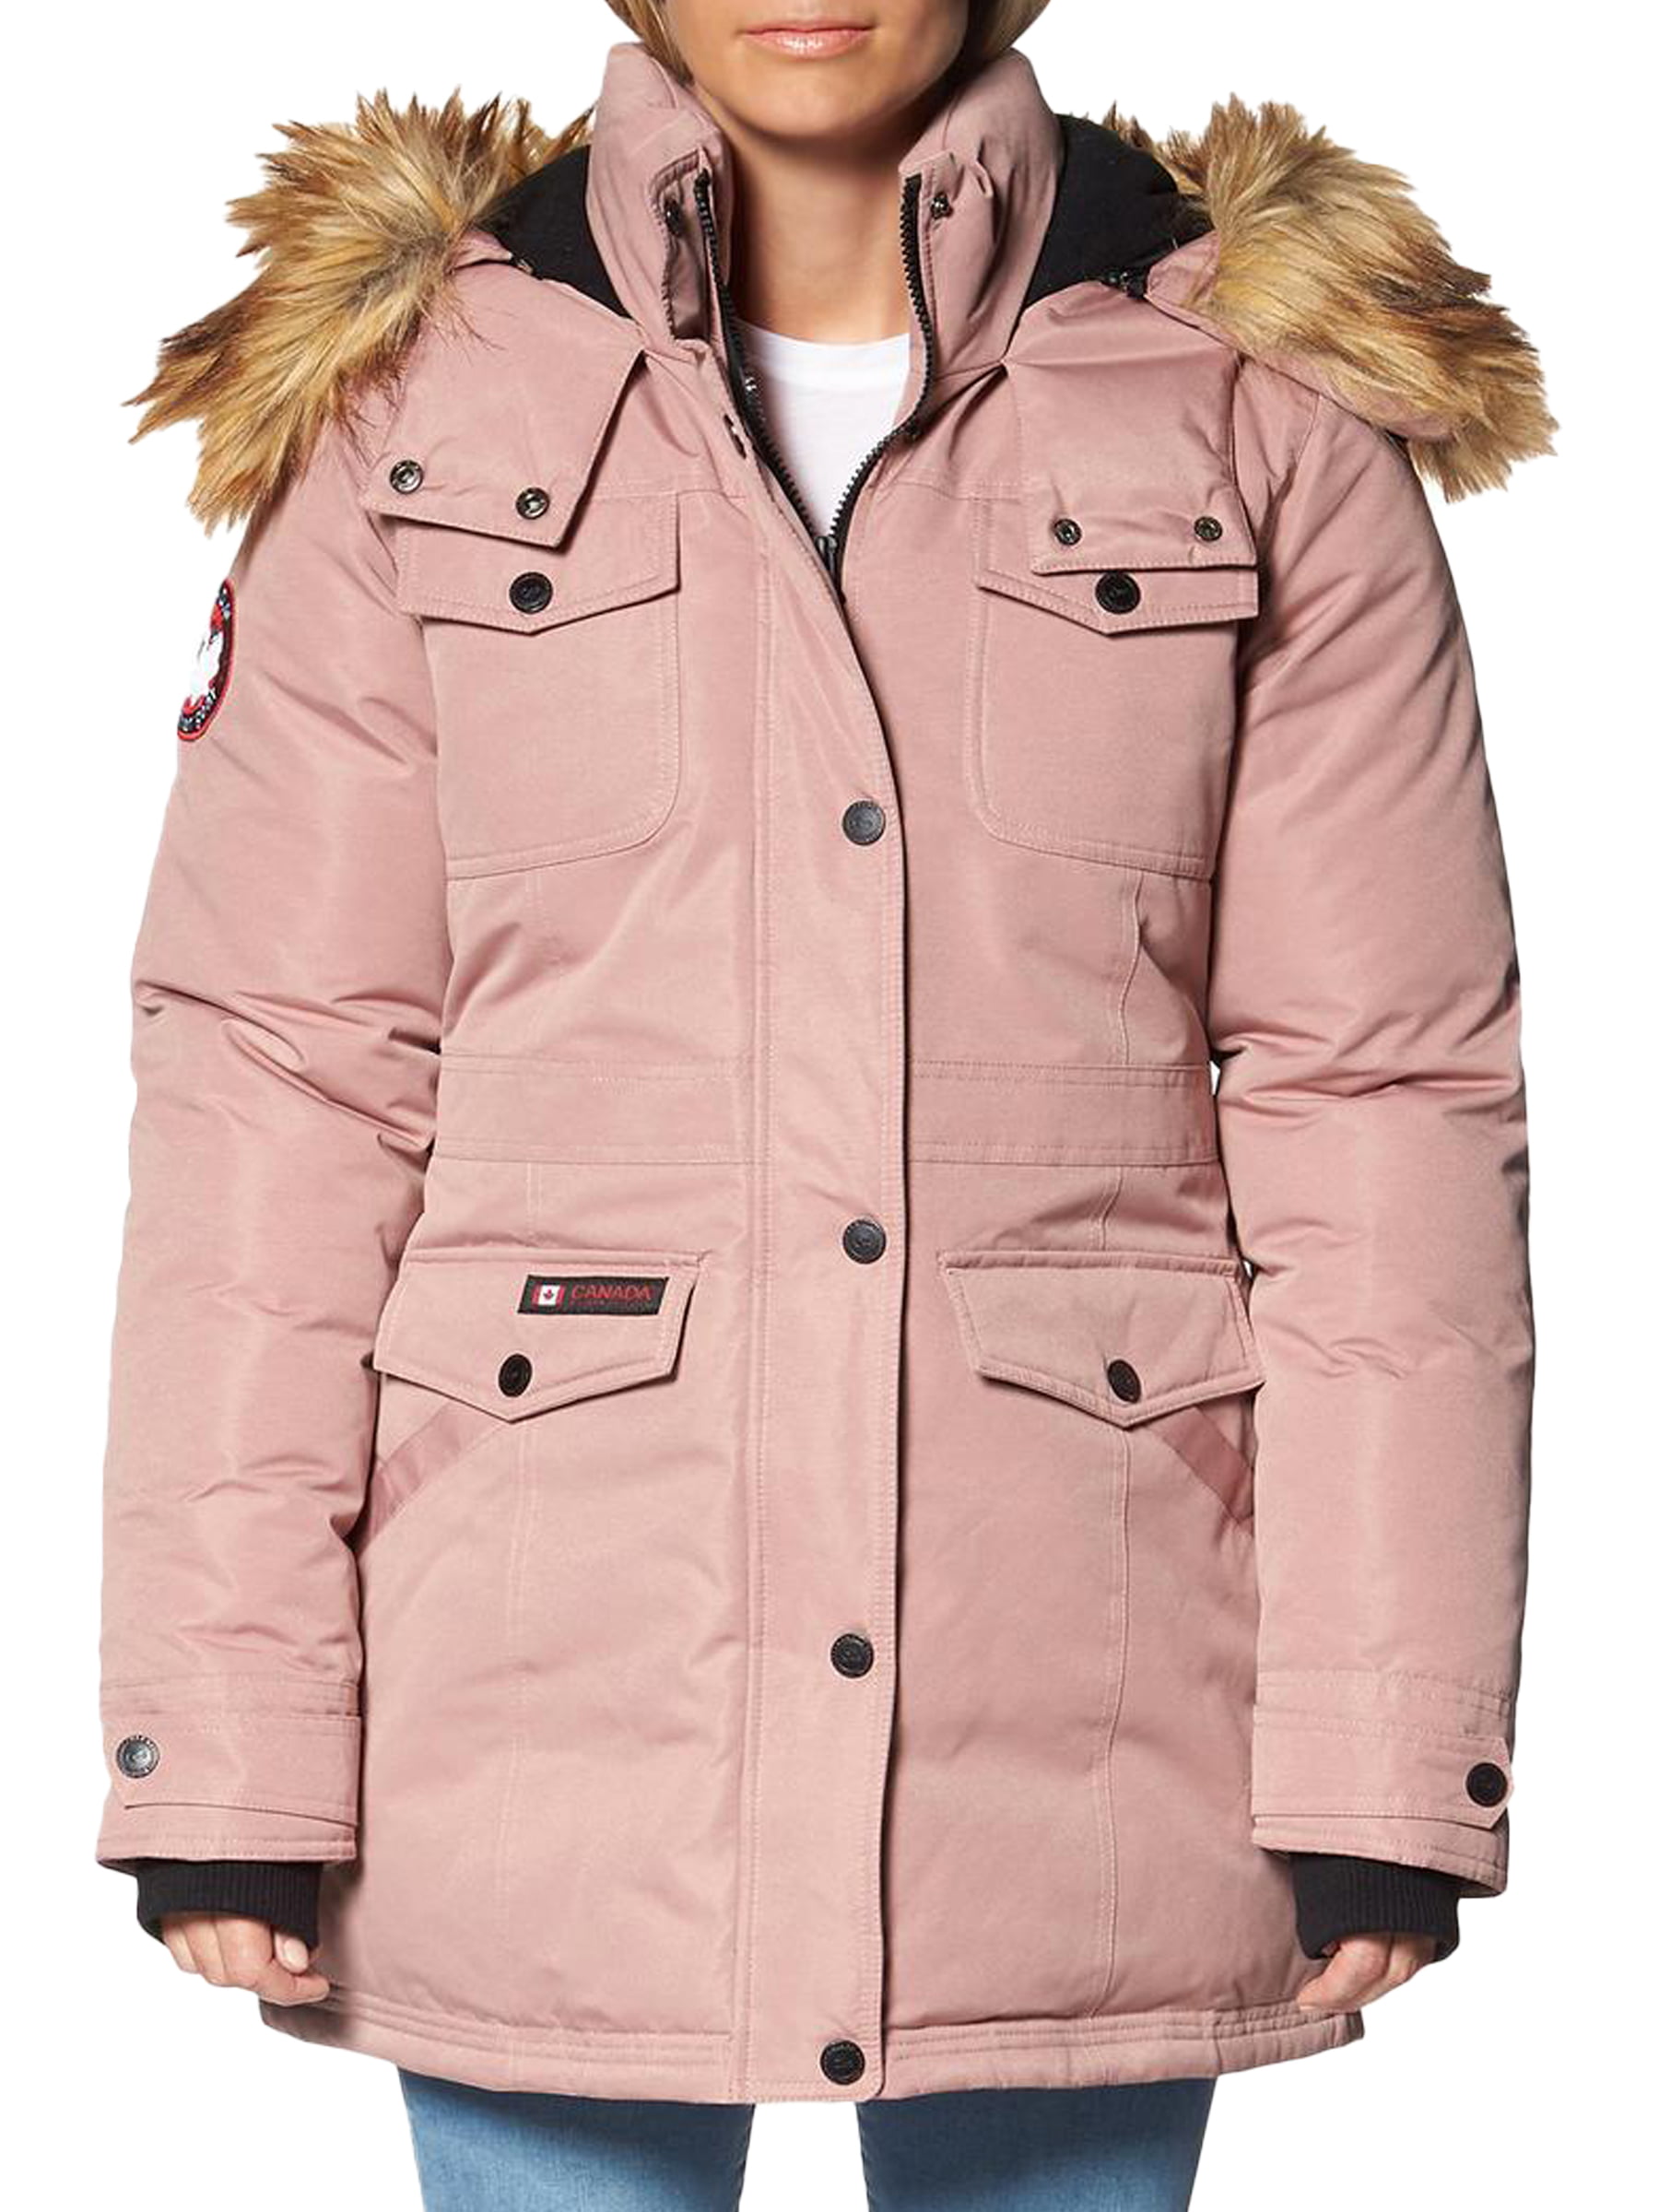 Long Puffer Bubble Jacket with Natural Fur Trimmed Hood CANADA WEATHER GEAR Girls Winter Coat